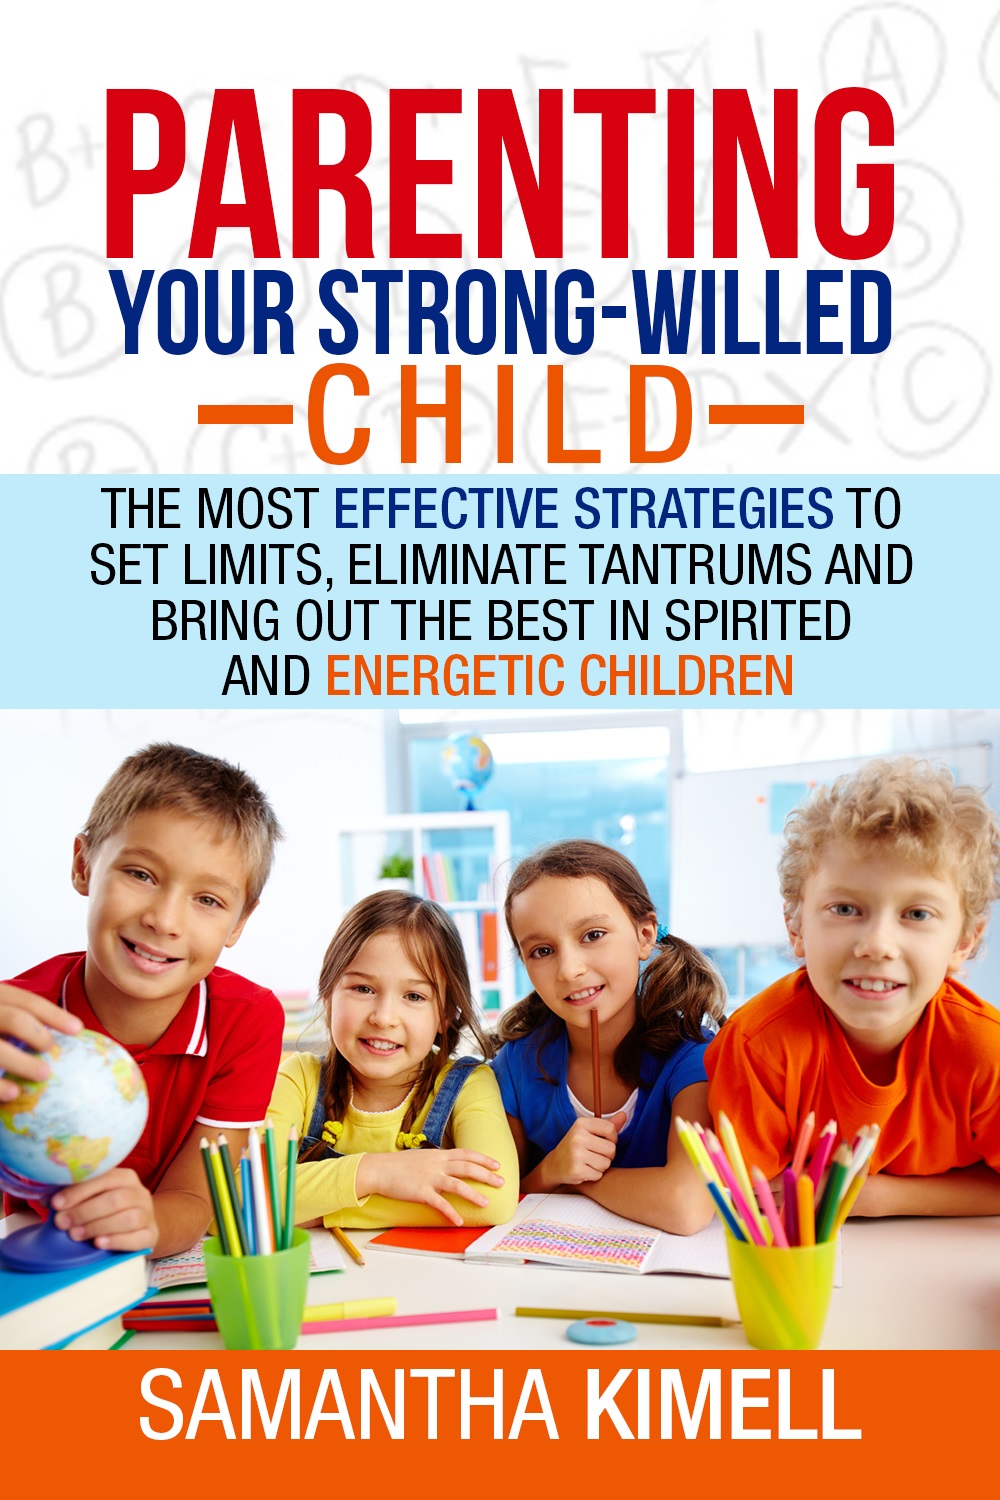 FREE: Parenting Your Strong-Willed Child: The Most Effective Strategies to Set Limits, Eliminate Tantrums and Bring Out the Best in Spirited and Energetic Children by Samantha Kimell